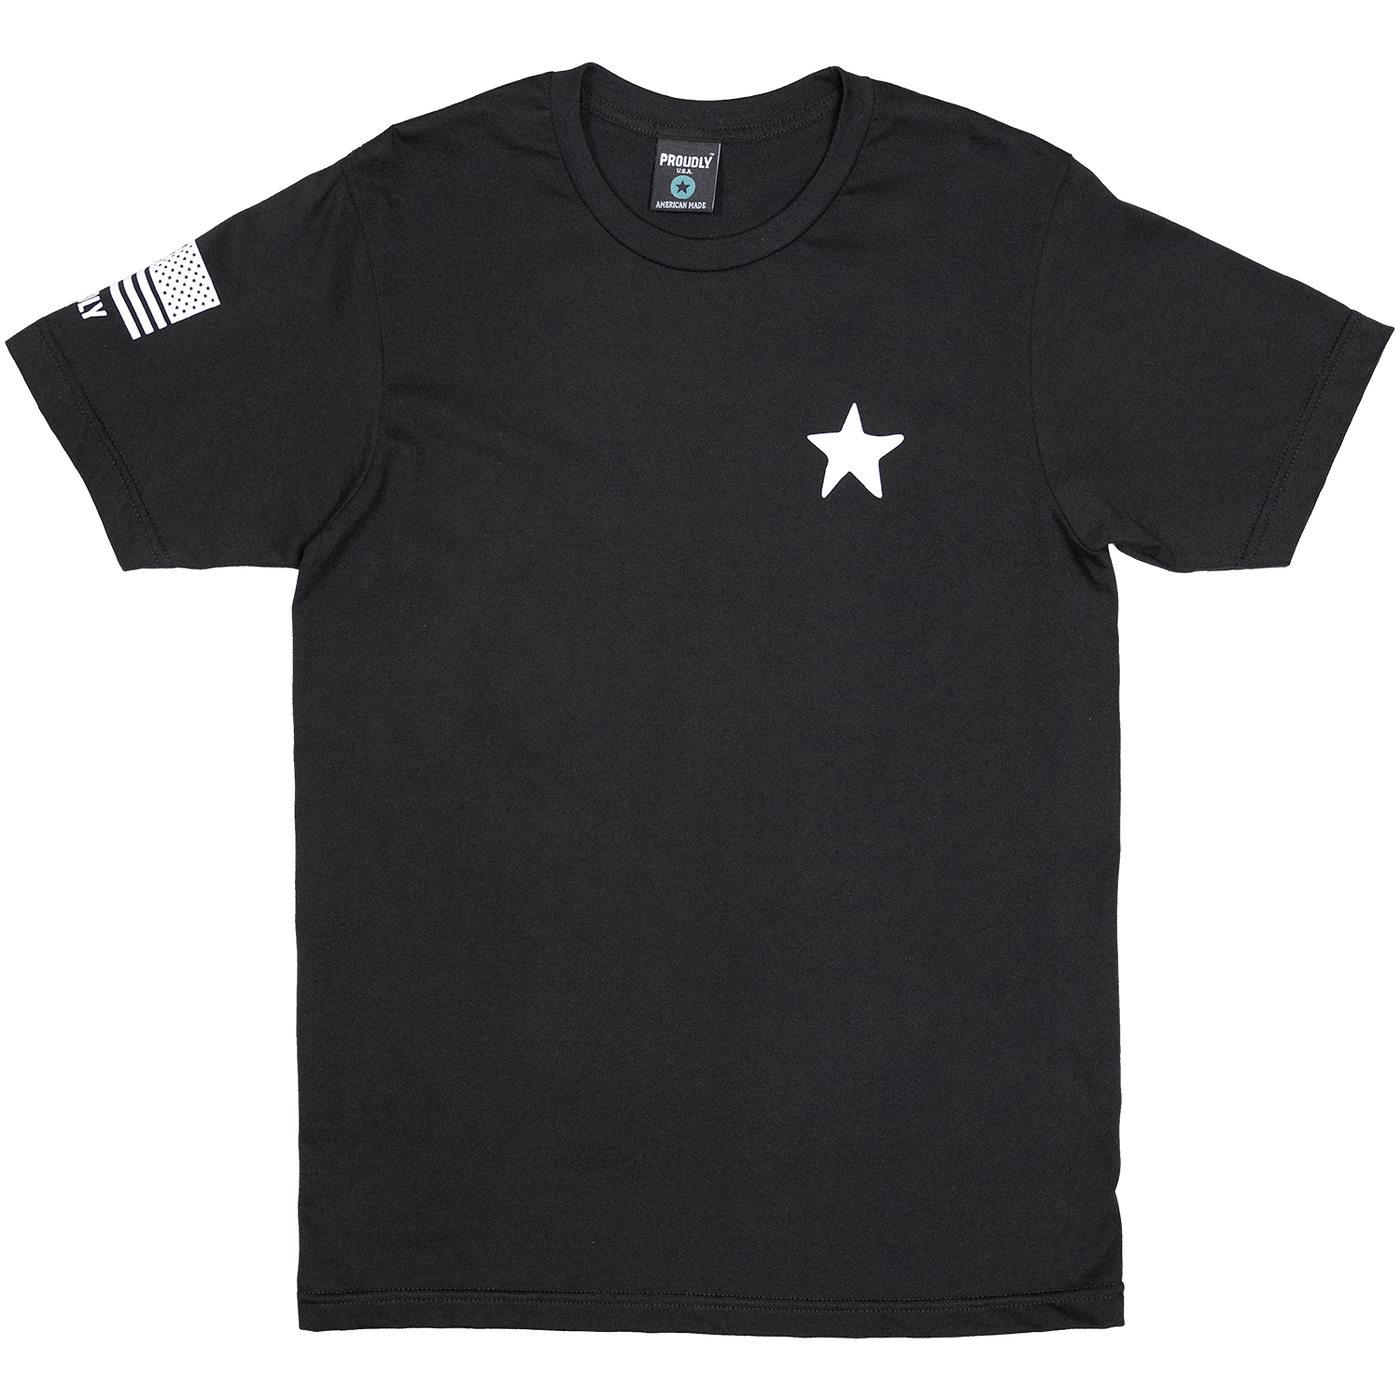 Black 100% Combed Ringspun Cotton T-Shirt with Patriotic Graphic on Chest and Sleeve